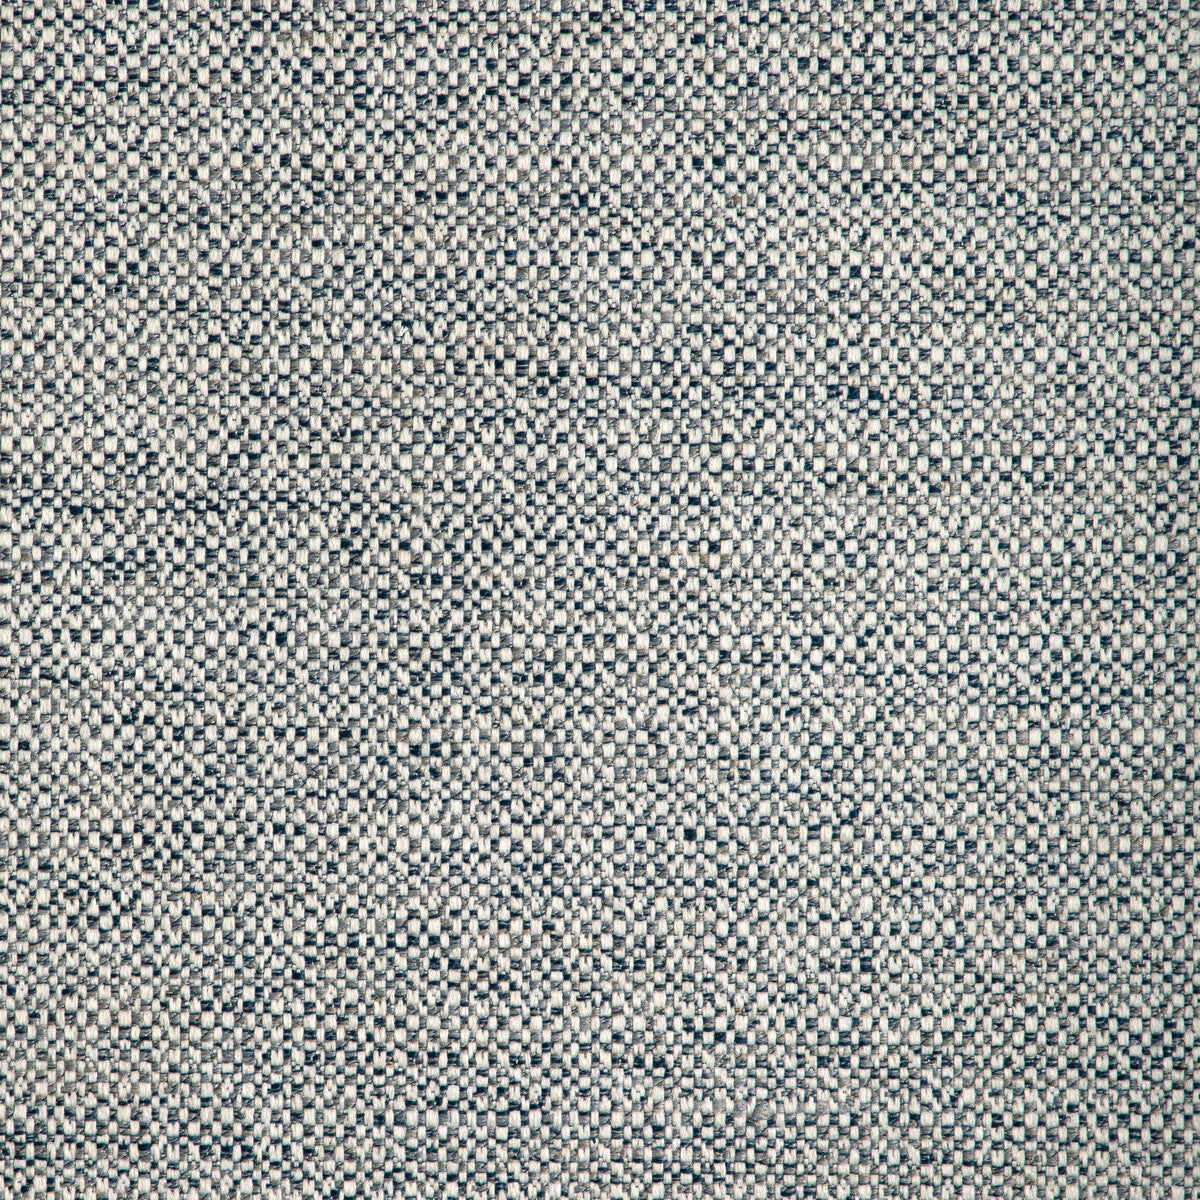 Kravet Design fabric in 35676-51 color - pattern 35676.51.0 - by Kravet Design in the Woven Colors collection